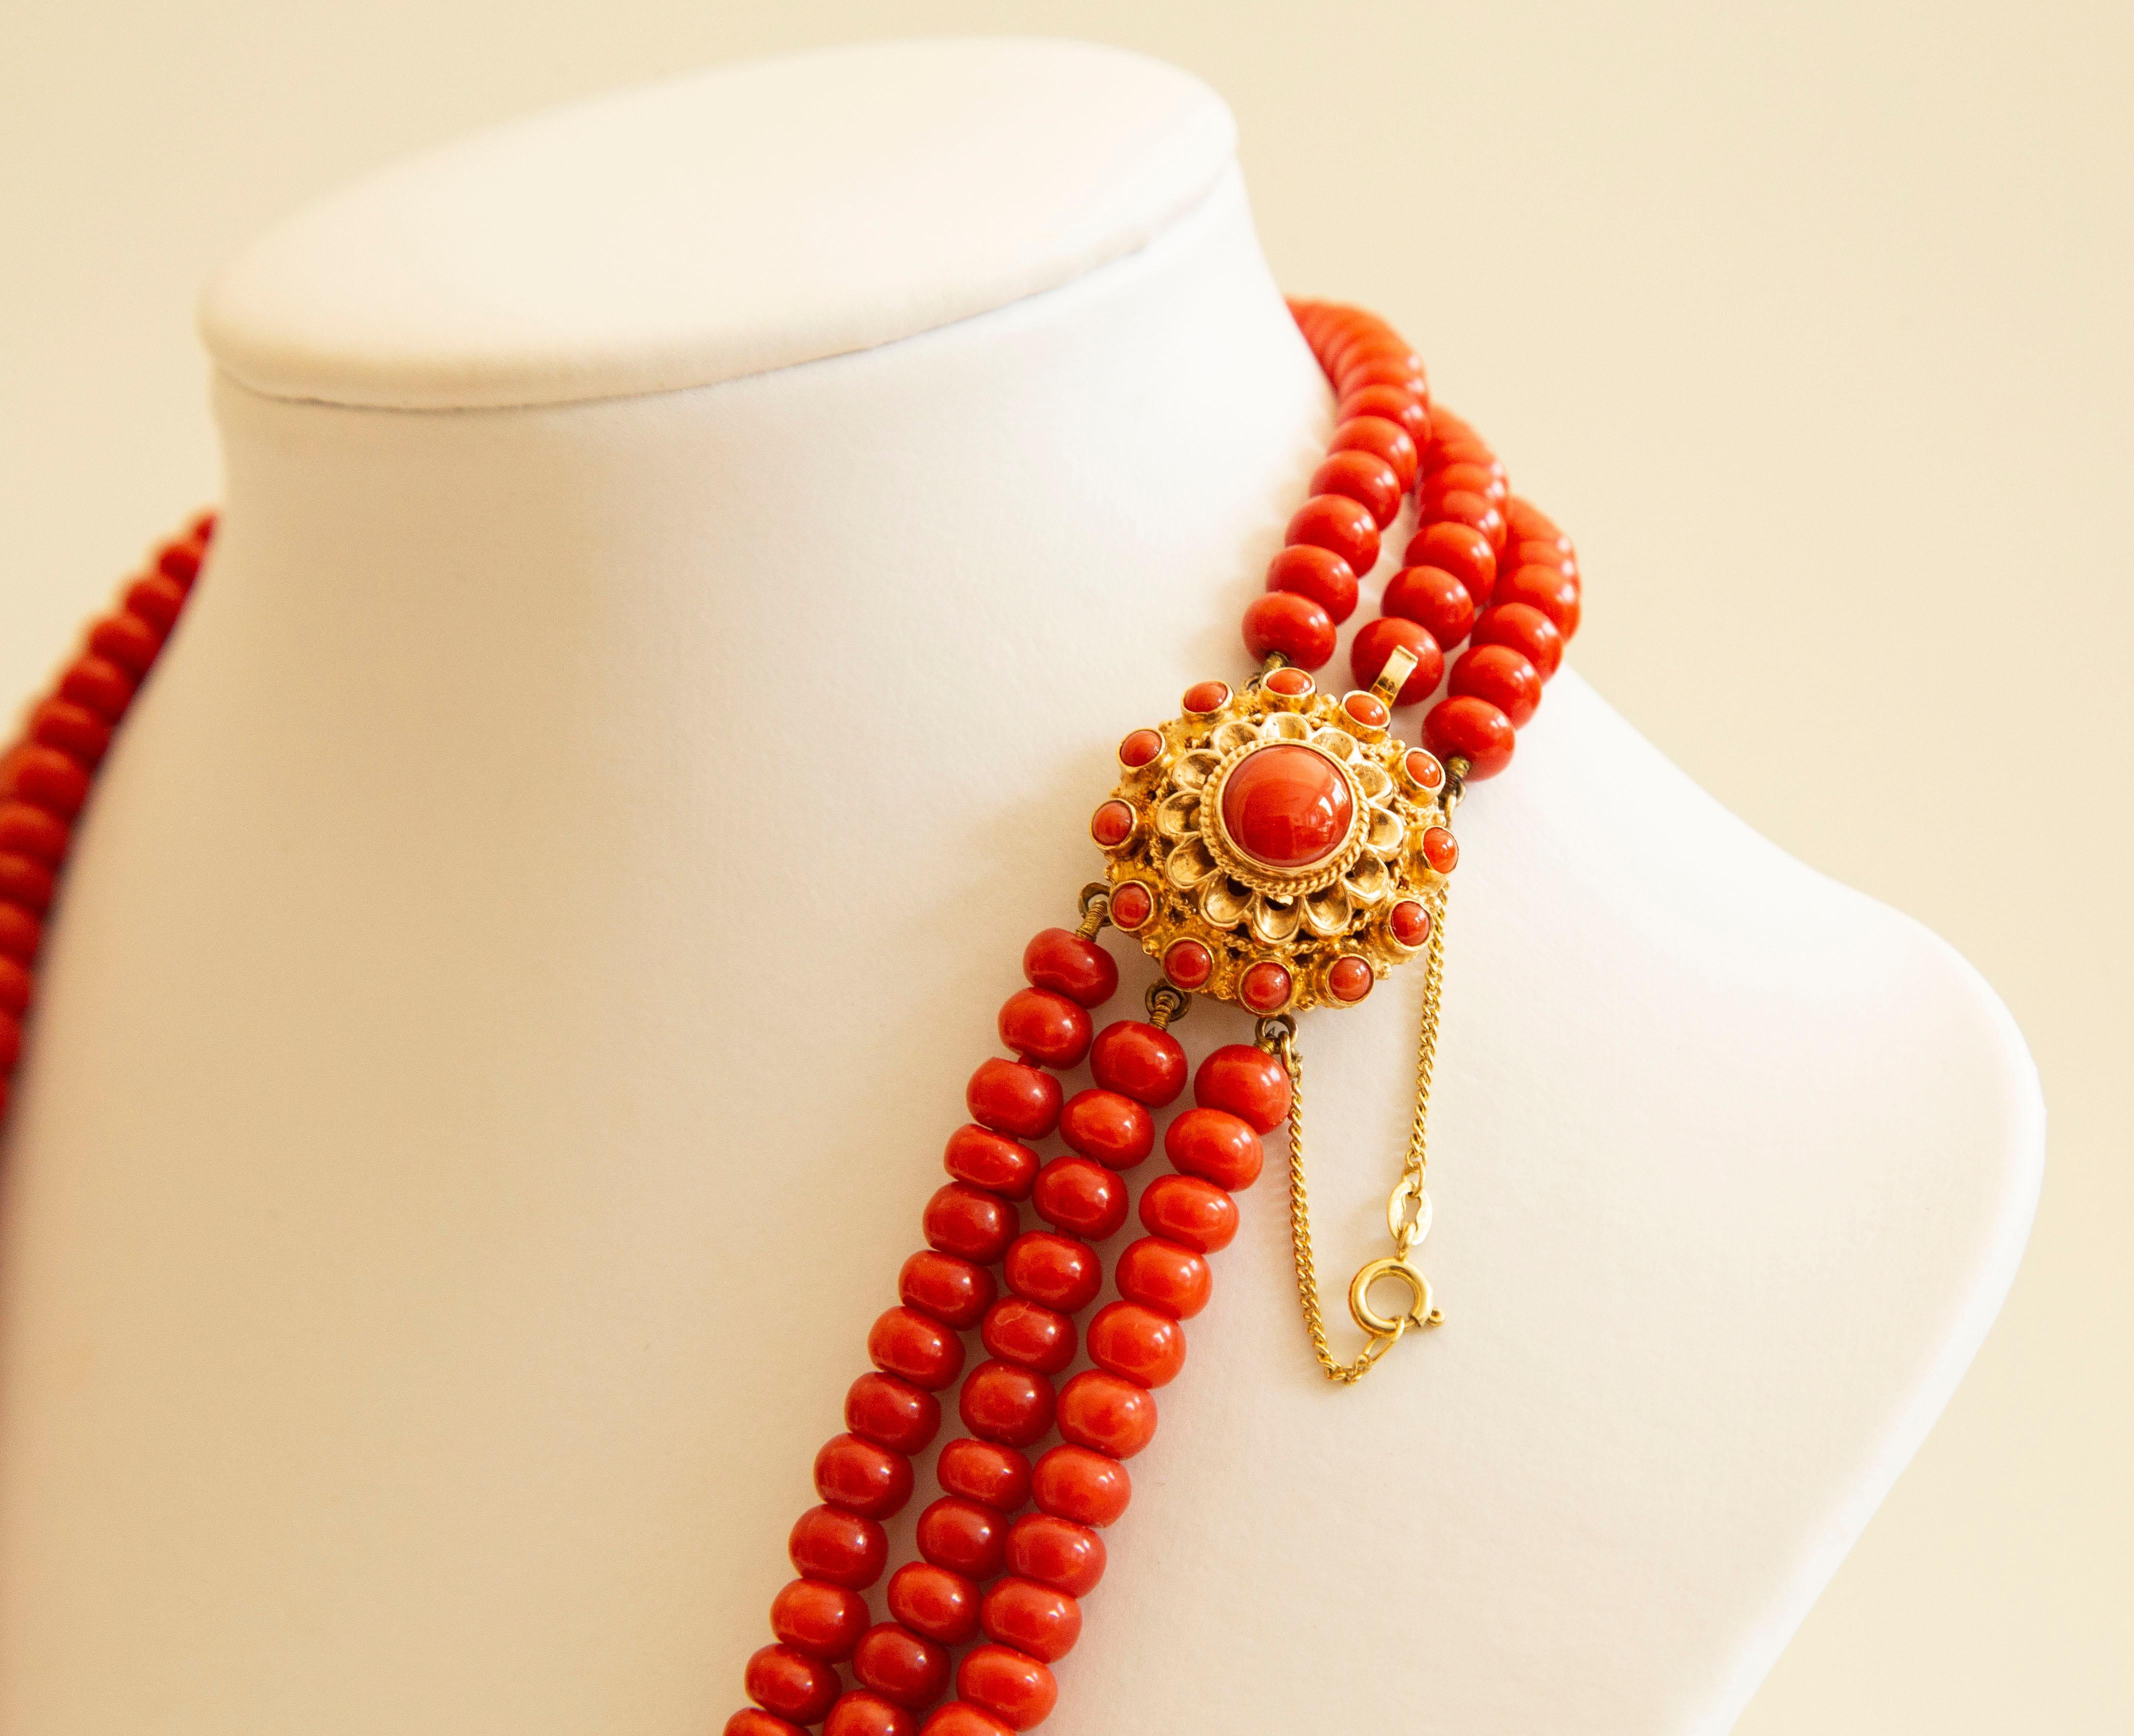 Bead Antique Dutch 3-Row Red Coral Necklace Choker with Filigree 14 Karat Gold Clasp For Sale